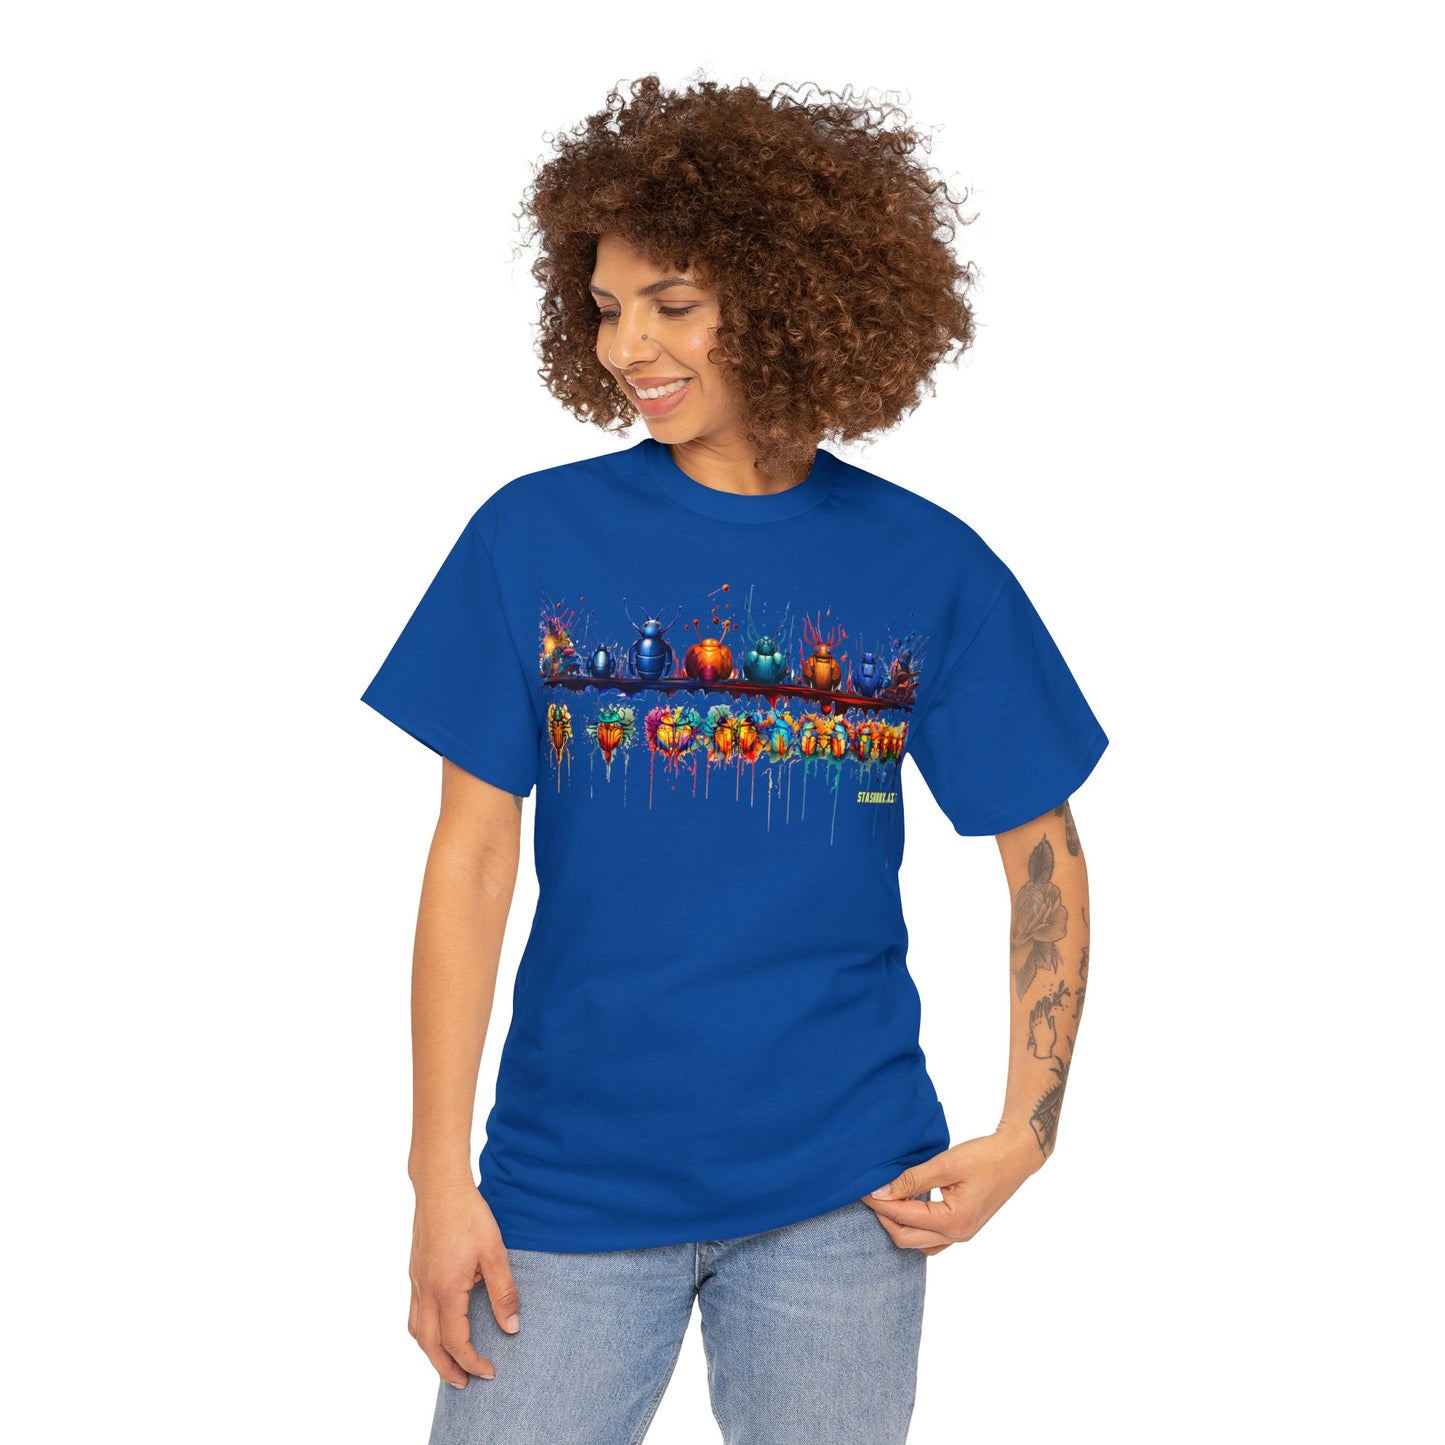 Unisex Heavy Cotton Tee Colorful Bugs 001 T-Shirt